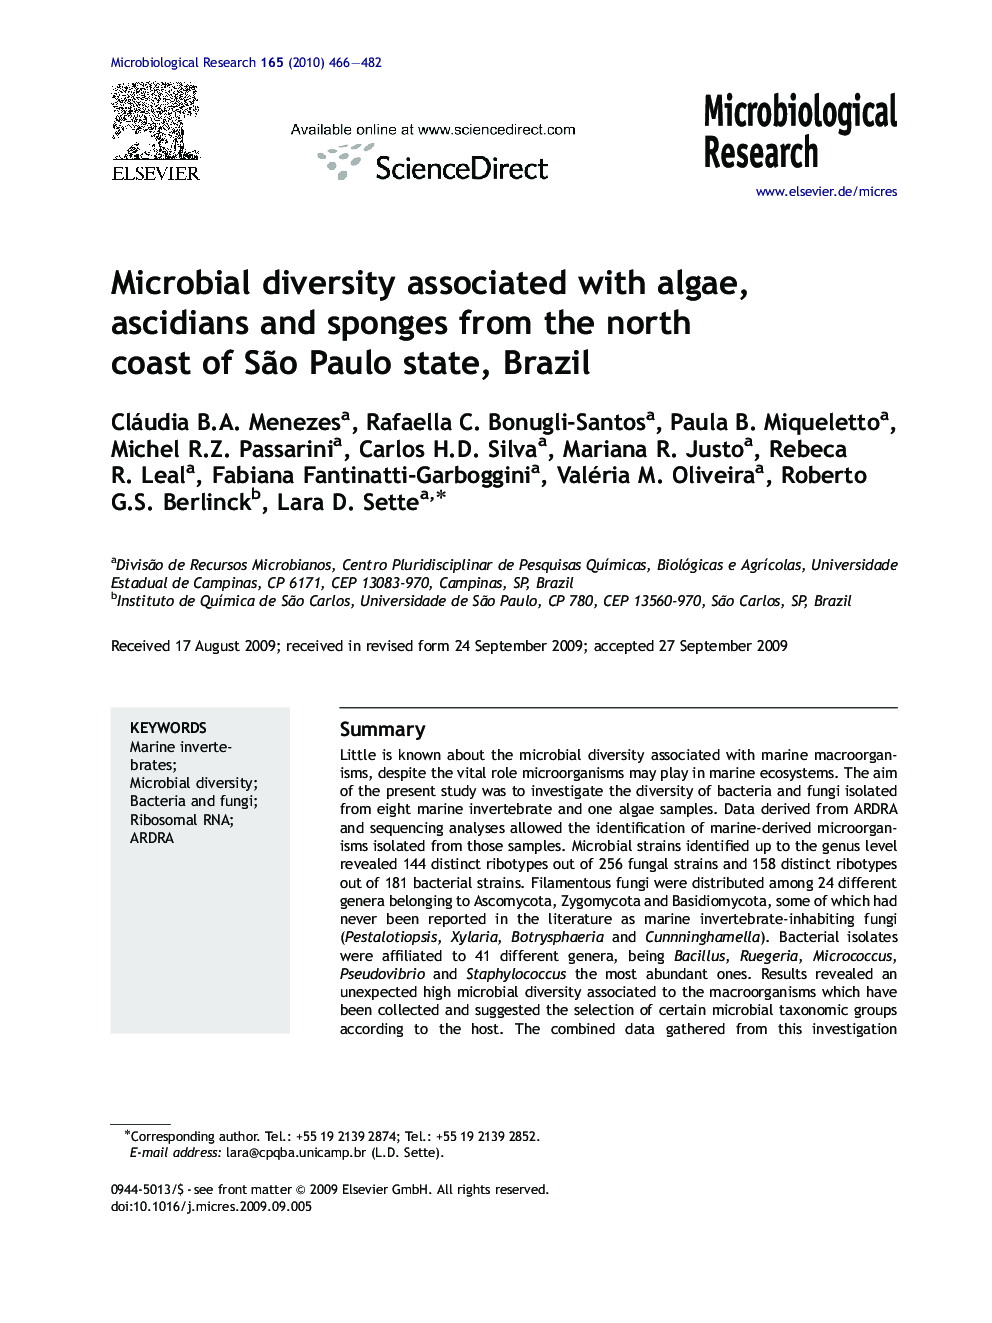 Microbial diversity associated with algae, ascidians and sponges from the north coast of São Paulo state, Brazil